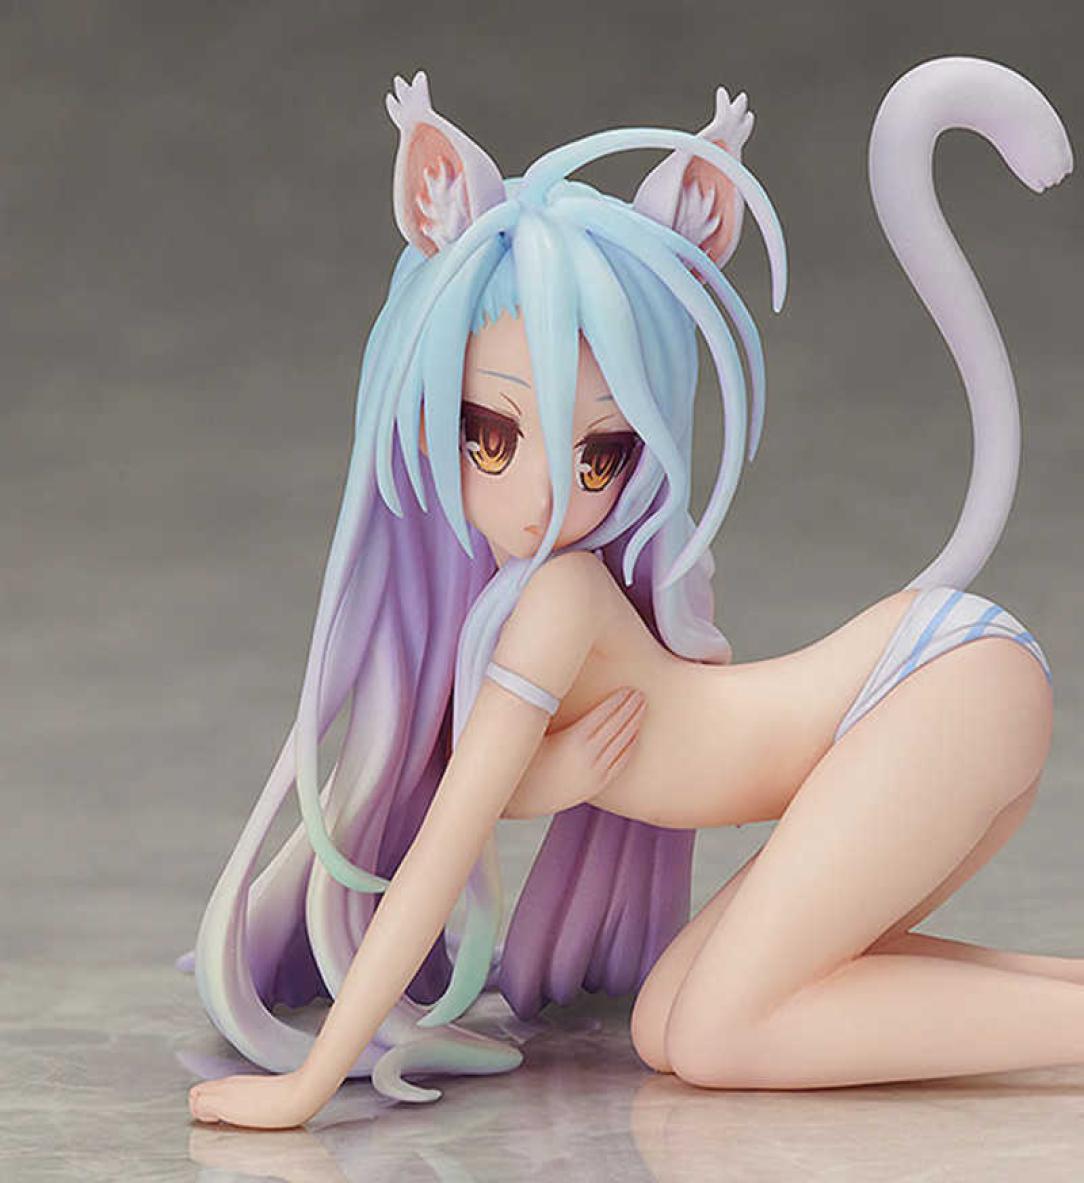 

9CM Anime No Game No Life Shiro Cat Figure Toy Sexy Girl Collectible Model Figurine PVC Action Figure Model Toys Gift Y07055463593